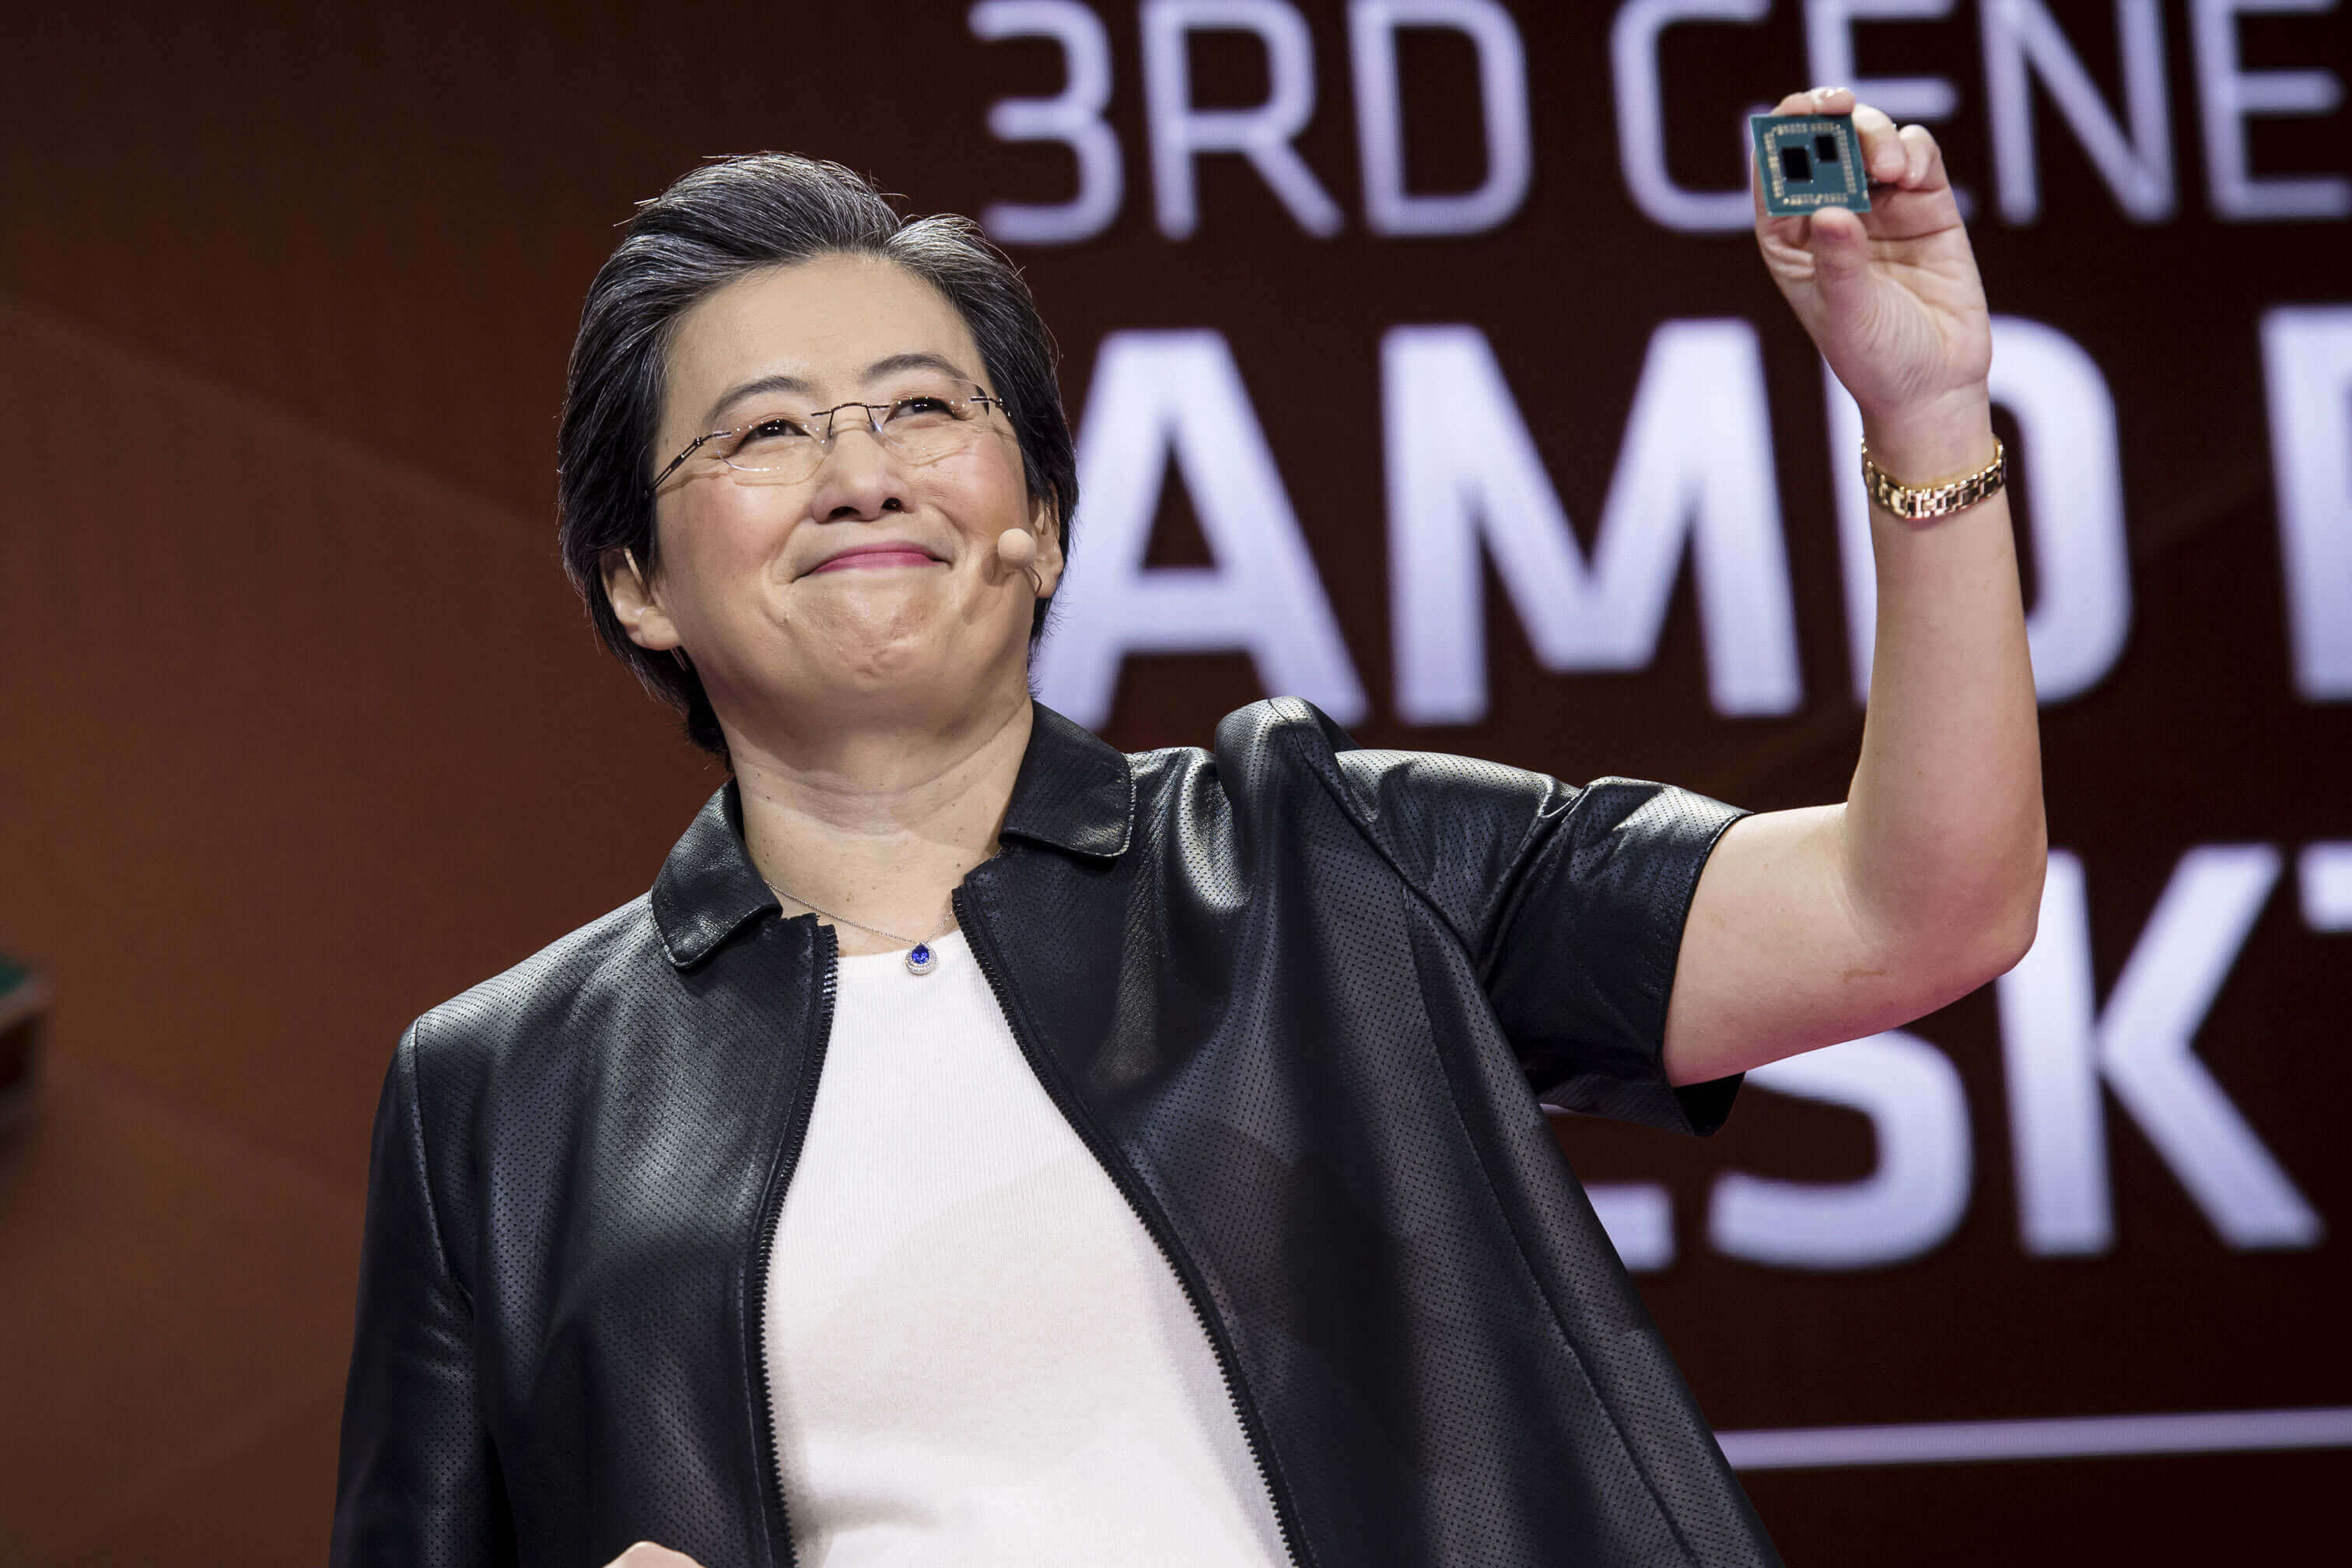 AMD confirms that X570 and B550 chipsets will support next-gen Zen 3 architecture